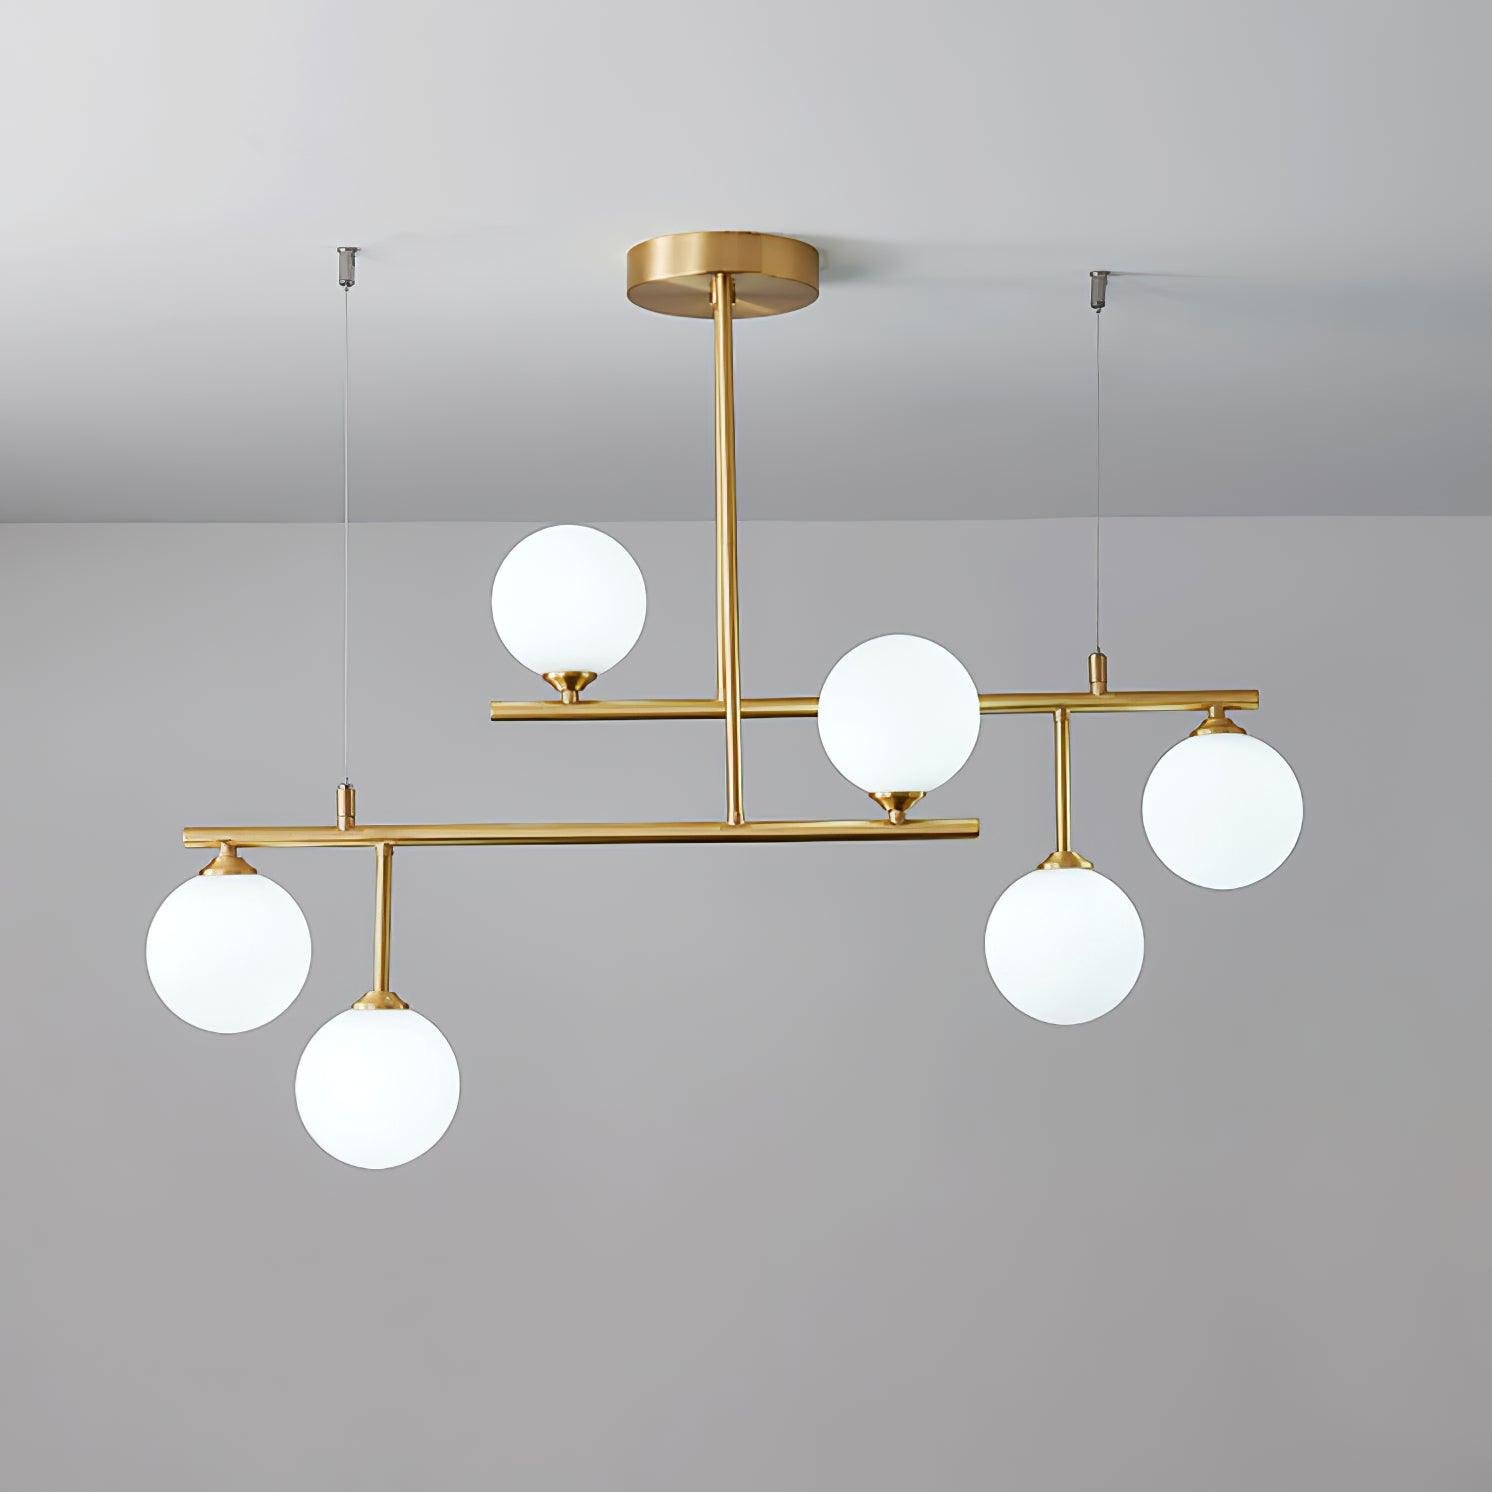 Arteriors Chandelier with 6heads, measuring 39.4" in diameter and 19.7" in height (100cm x 50cm), made of Brass+White.